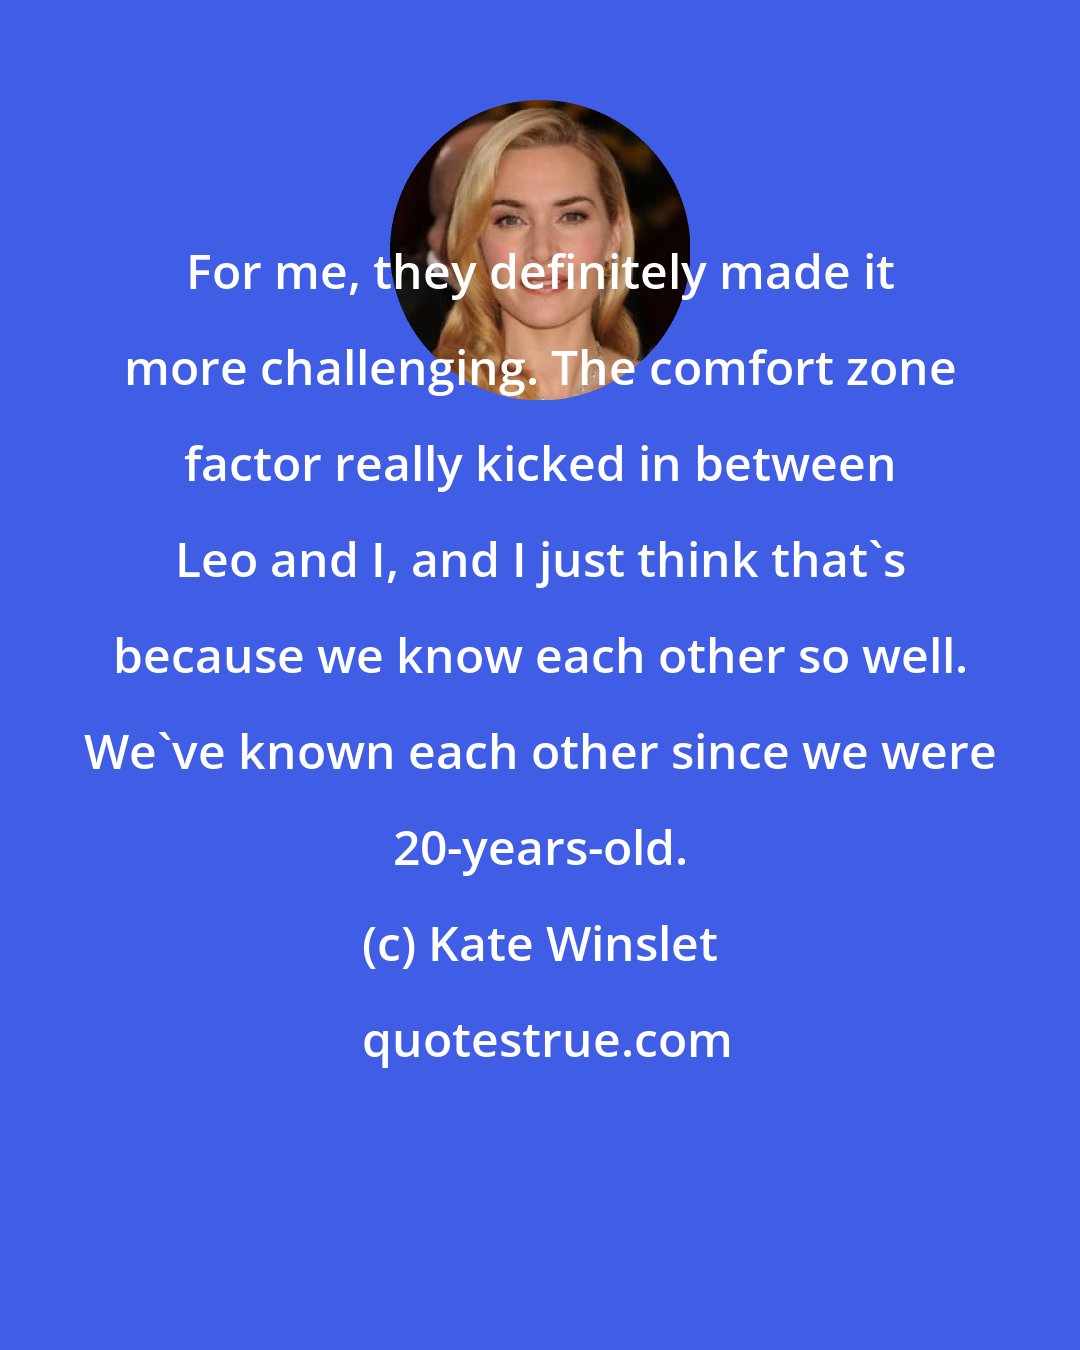 Kate Winslet: For me, they definitely made it more challenging. The comfort zone factor really kicked in between Leo and I, and I just think that's because we know each other so well. We've known each other since we were 20-years-old.